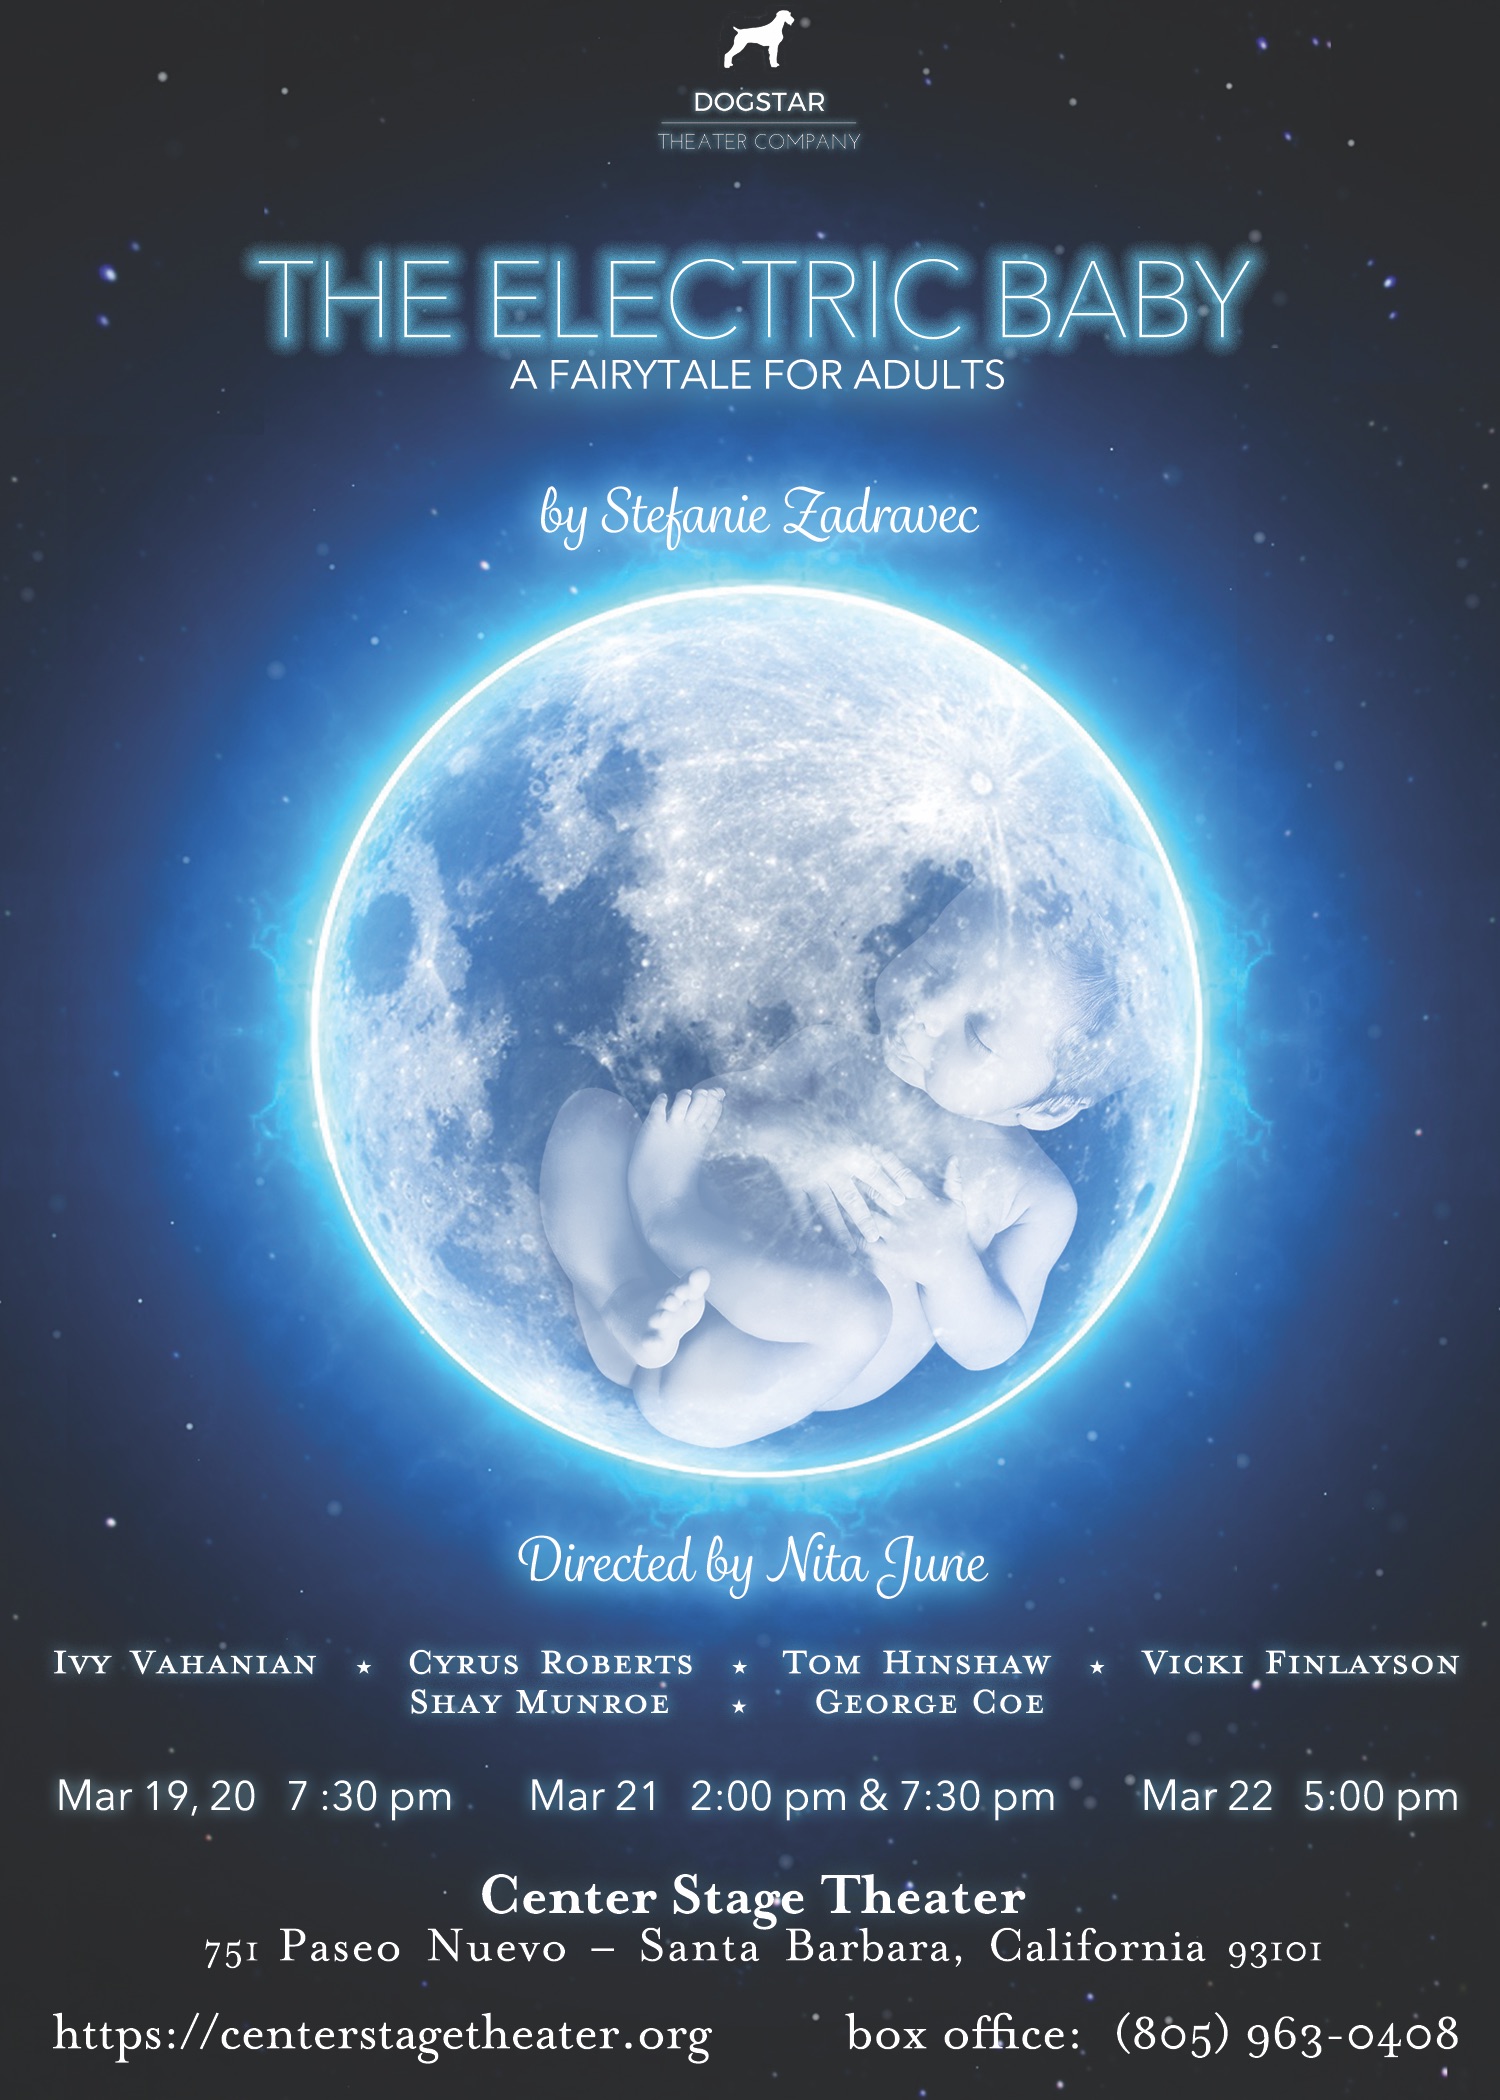 The Electric Baby